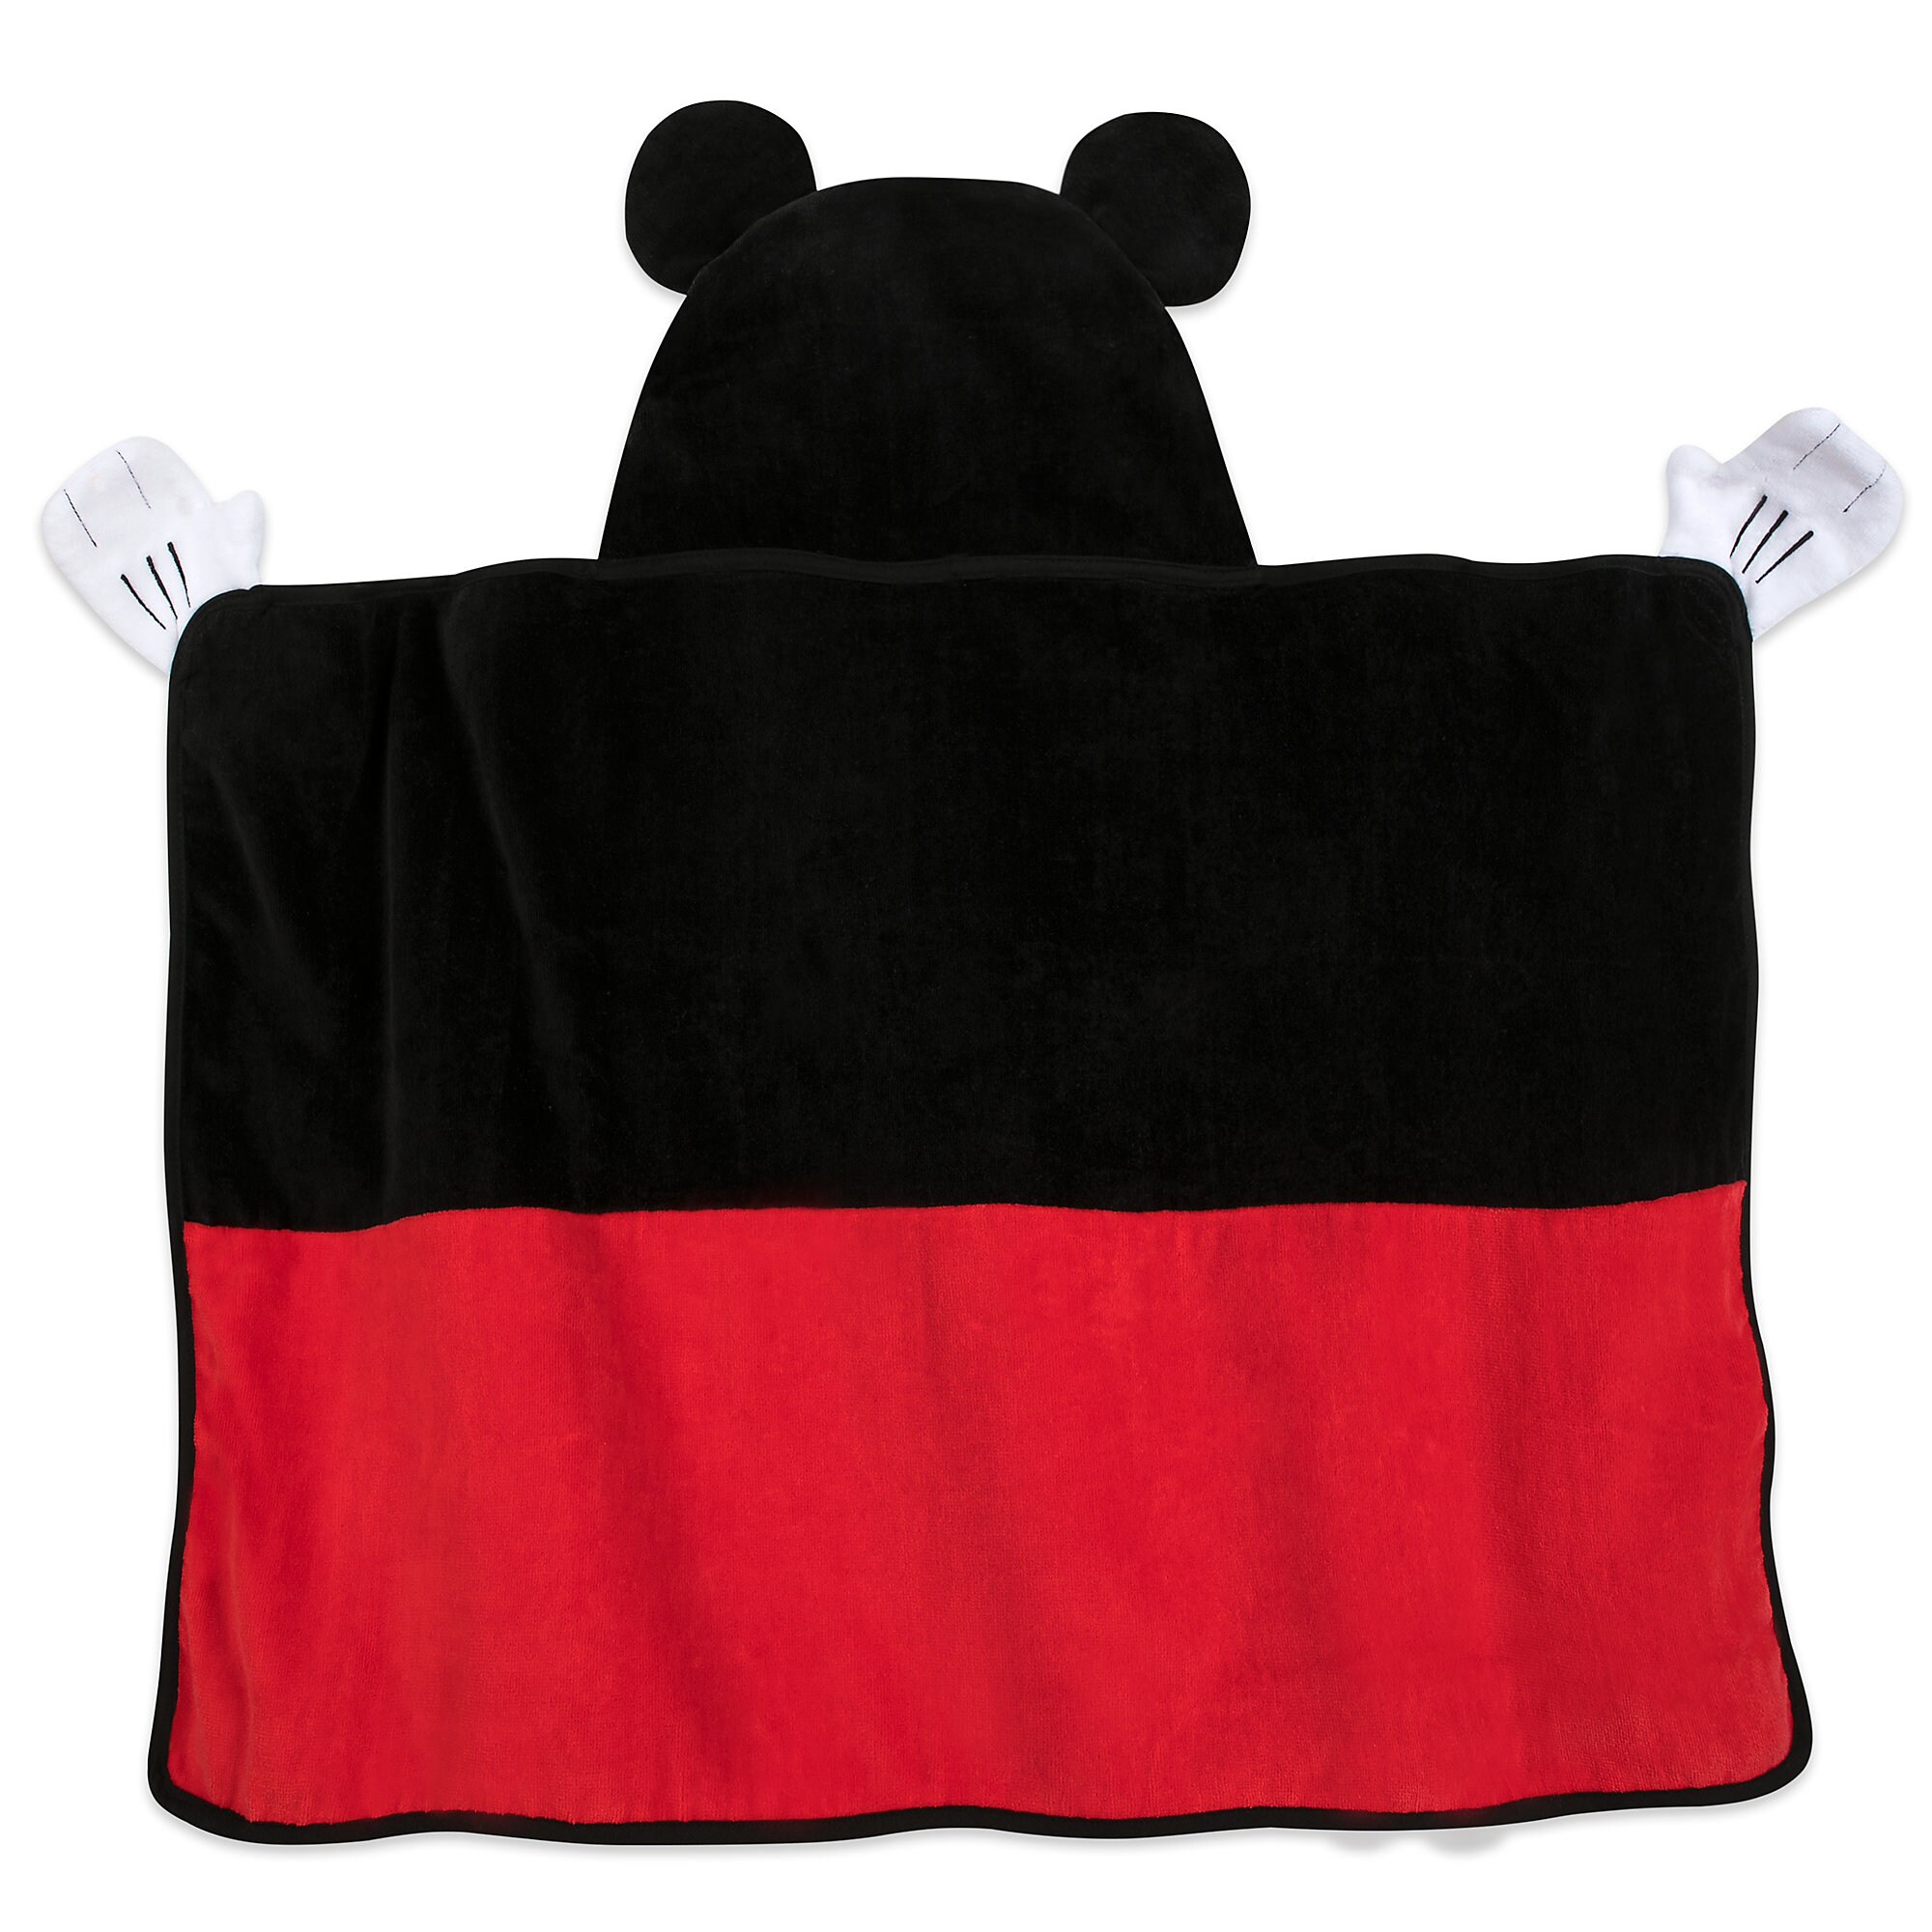 Mickey Mouse Hooded Towel for Baby - Personalized